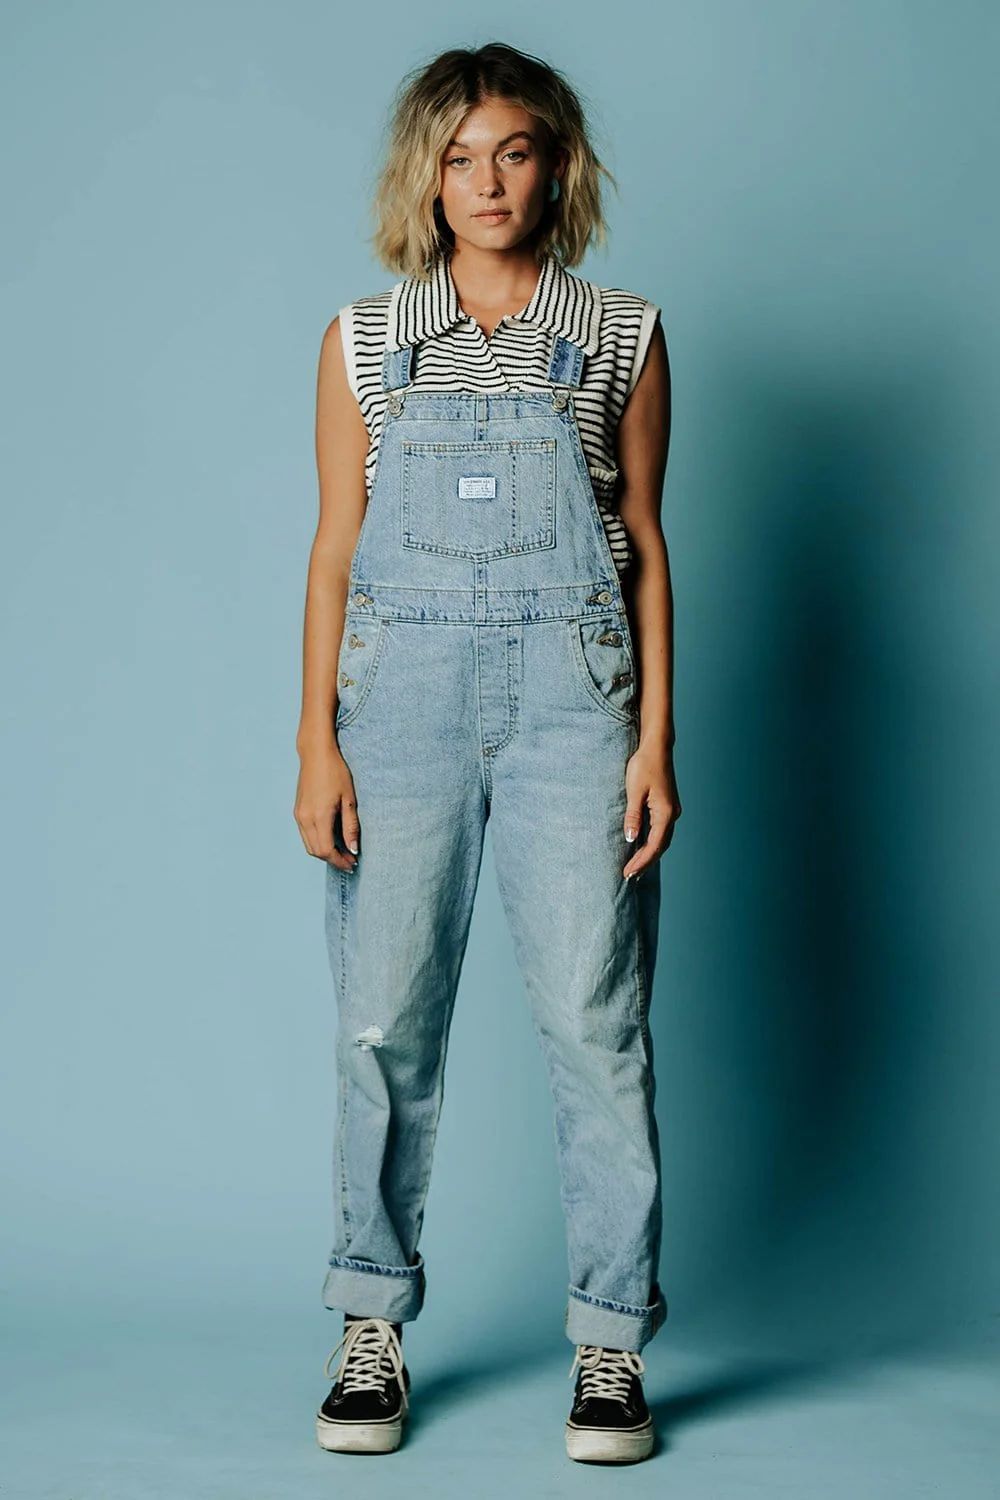 Levi's Vintage Overall Afternoon Stroll | Clad & Cloth